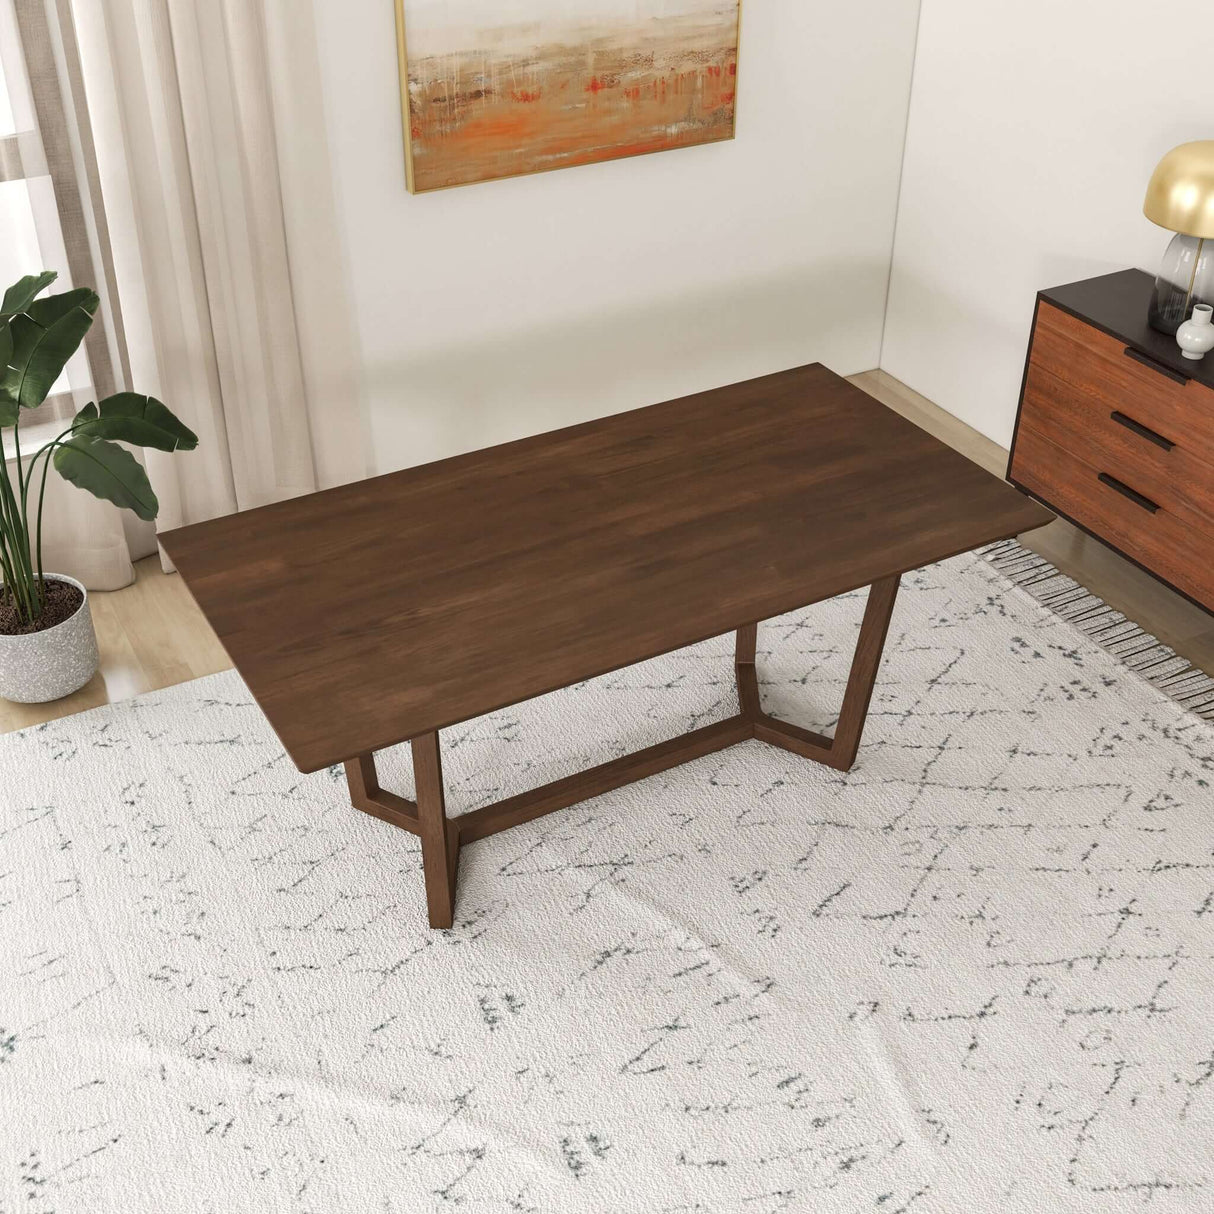 Marina Mid-Century Modern Solid Wood Dining Table in Brown